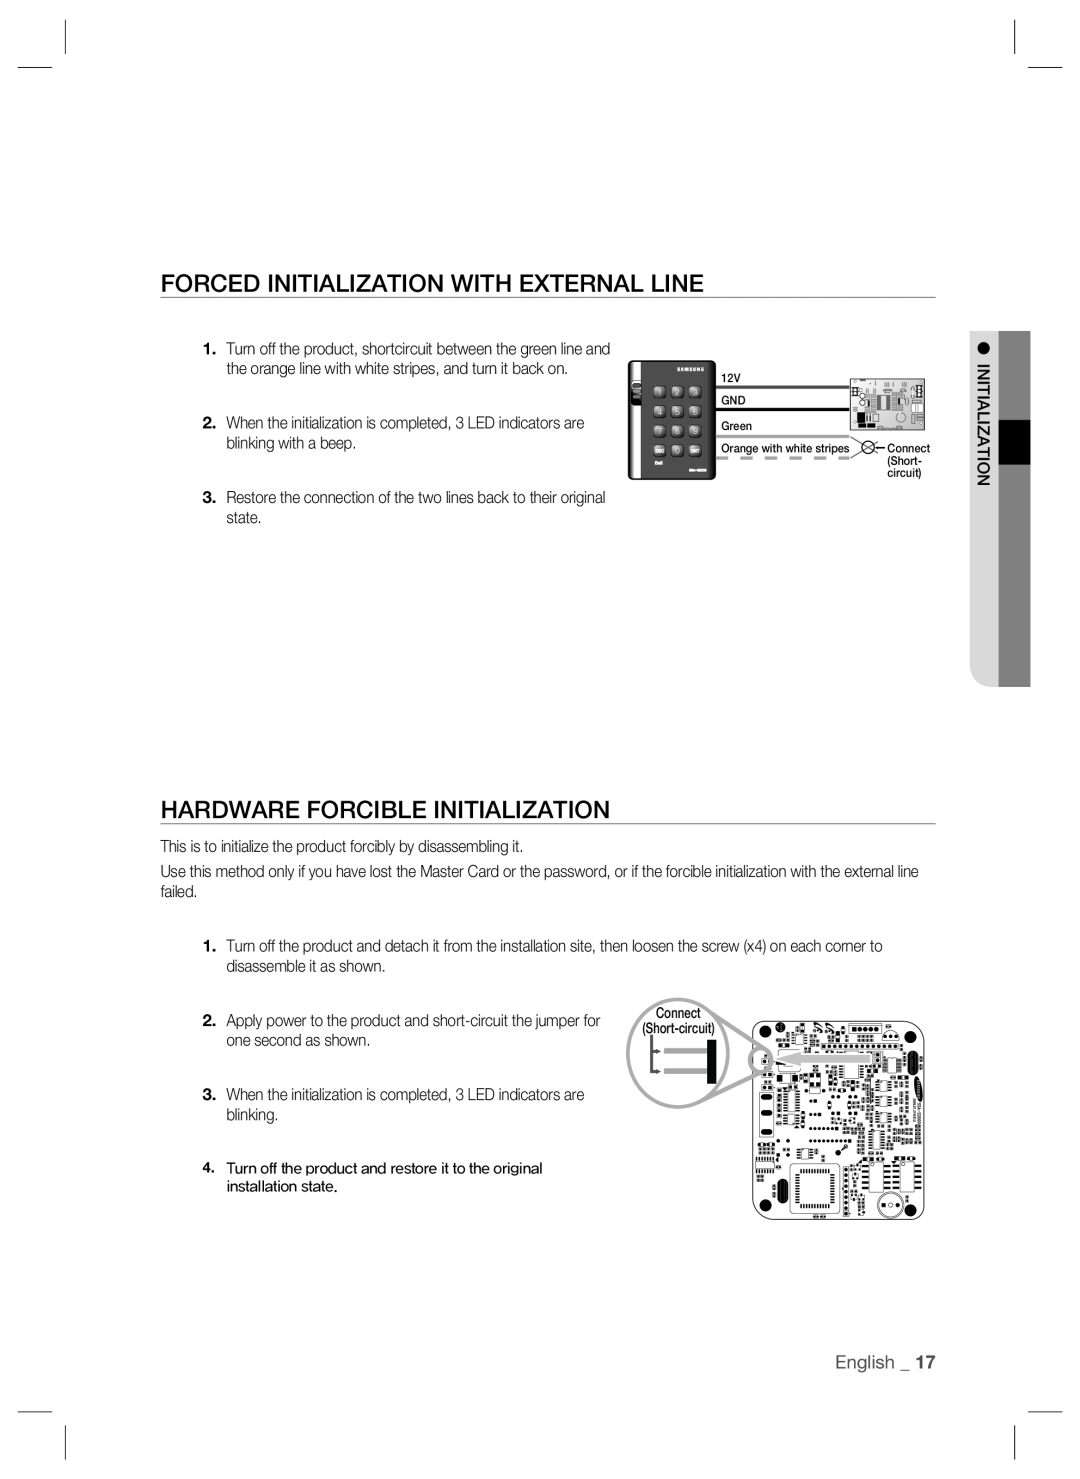 Samsung SSA-S2000W user manual Forced Initialization With External Line, Hardware Forcible Initialization, English _ 